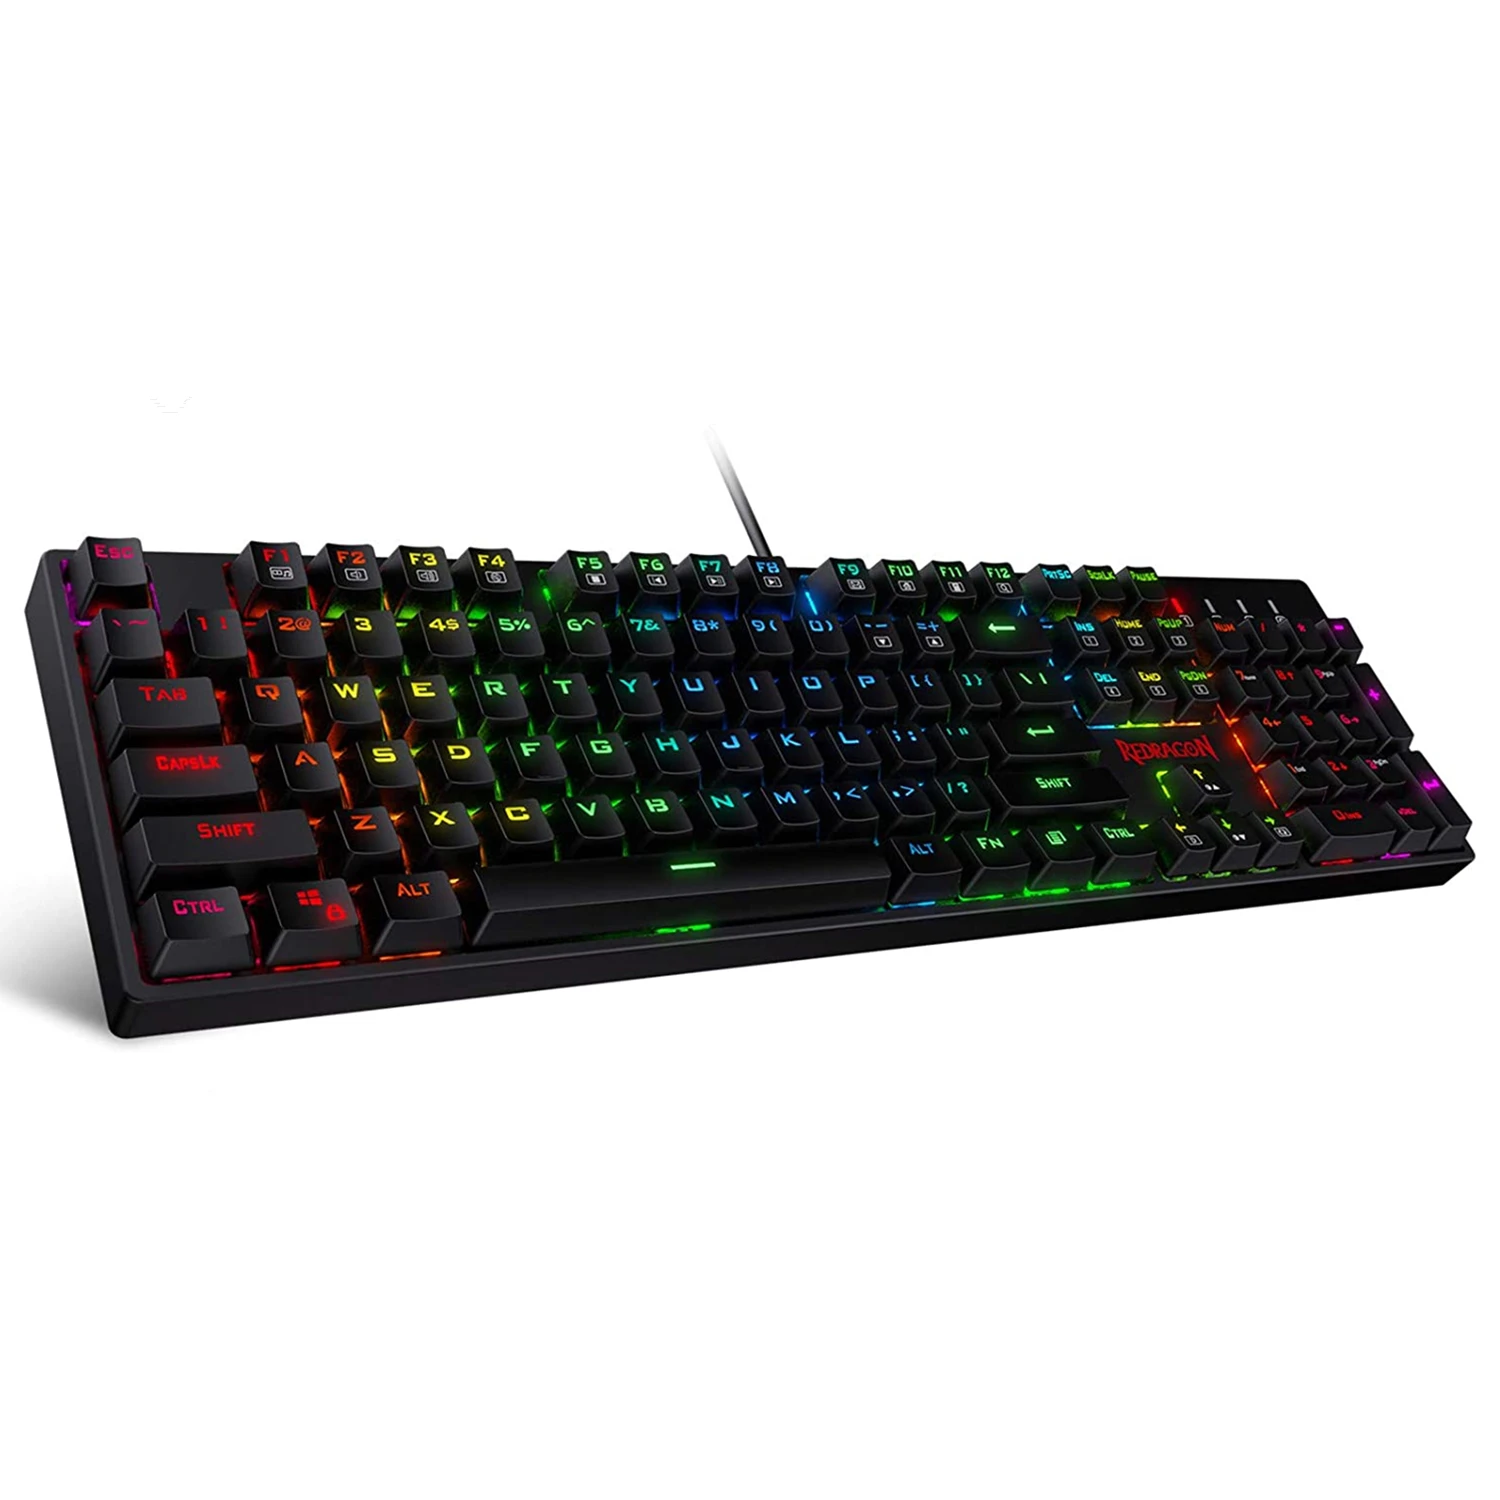 

Redragon K582 SURARA RGB LED Backlit Mechanical Gaming Keyboard with 104 Keys-Linear and Quiet Red Switches For Game Laptop PC